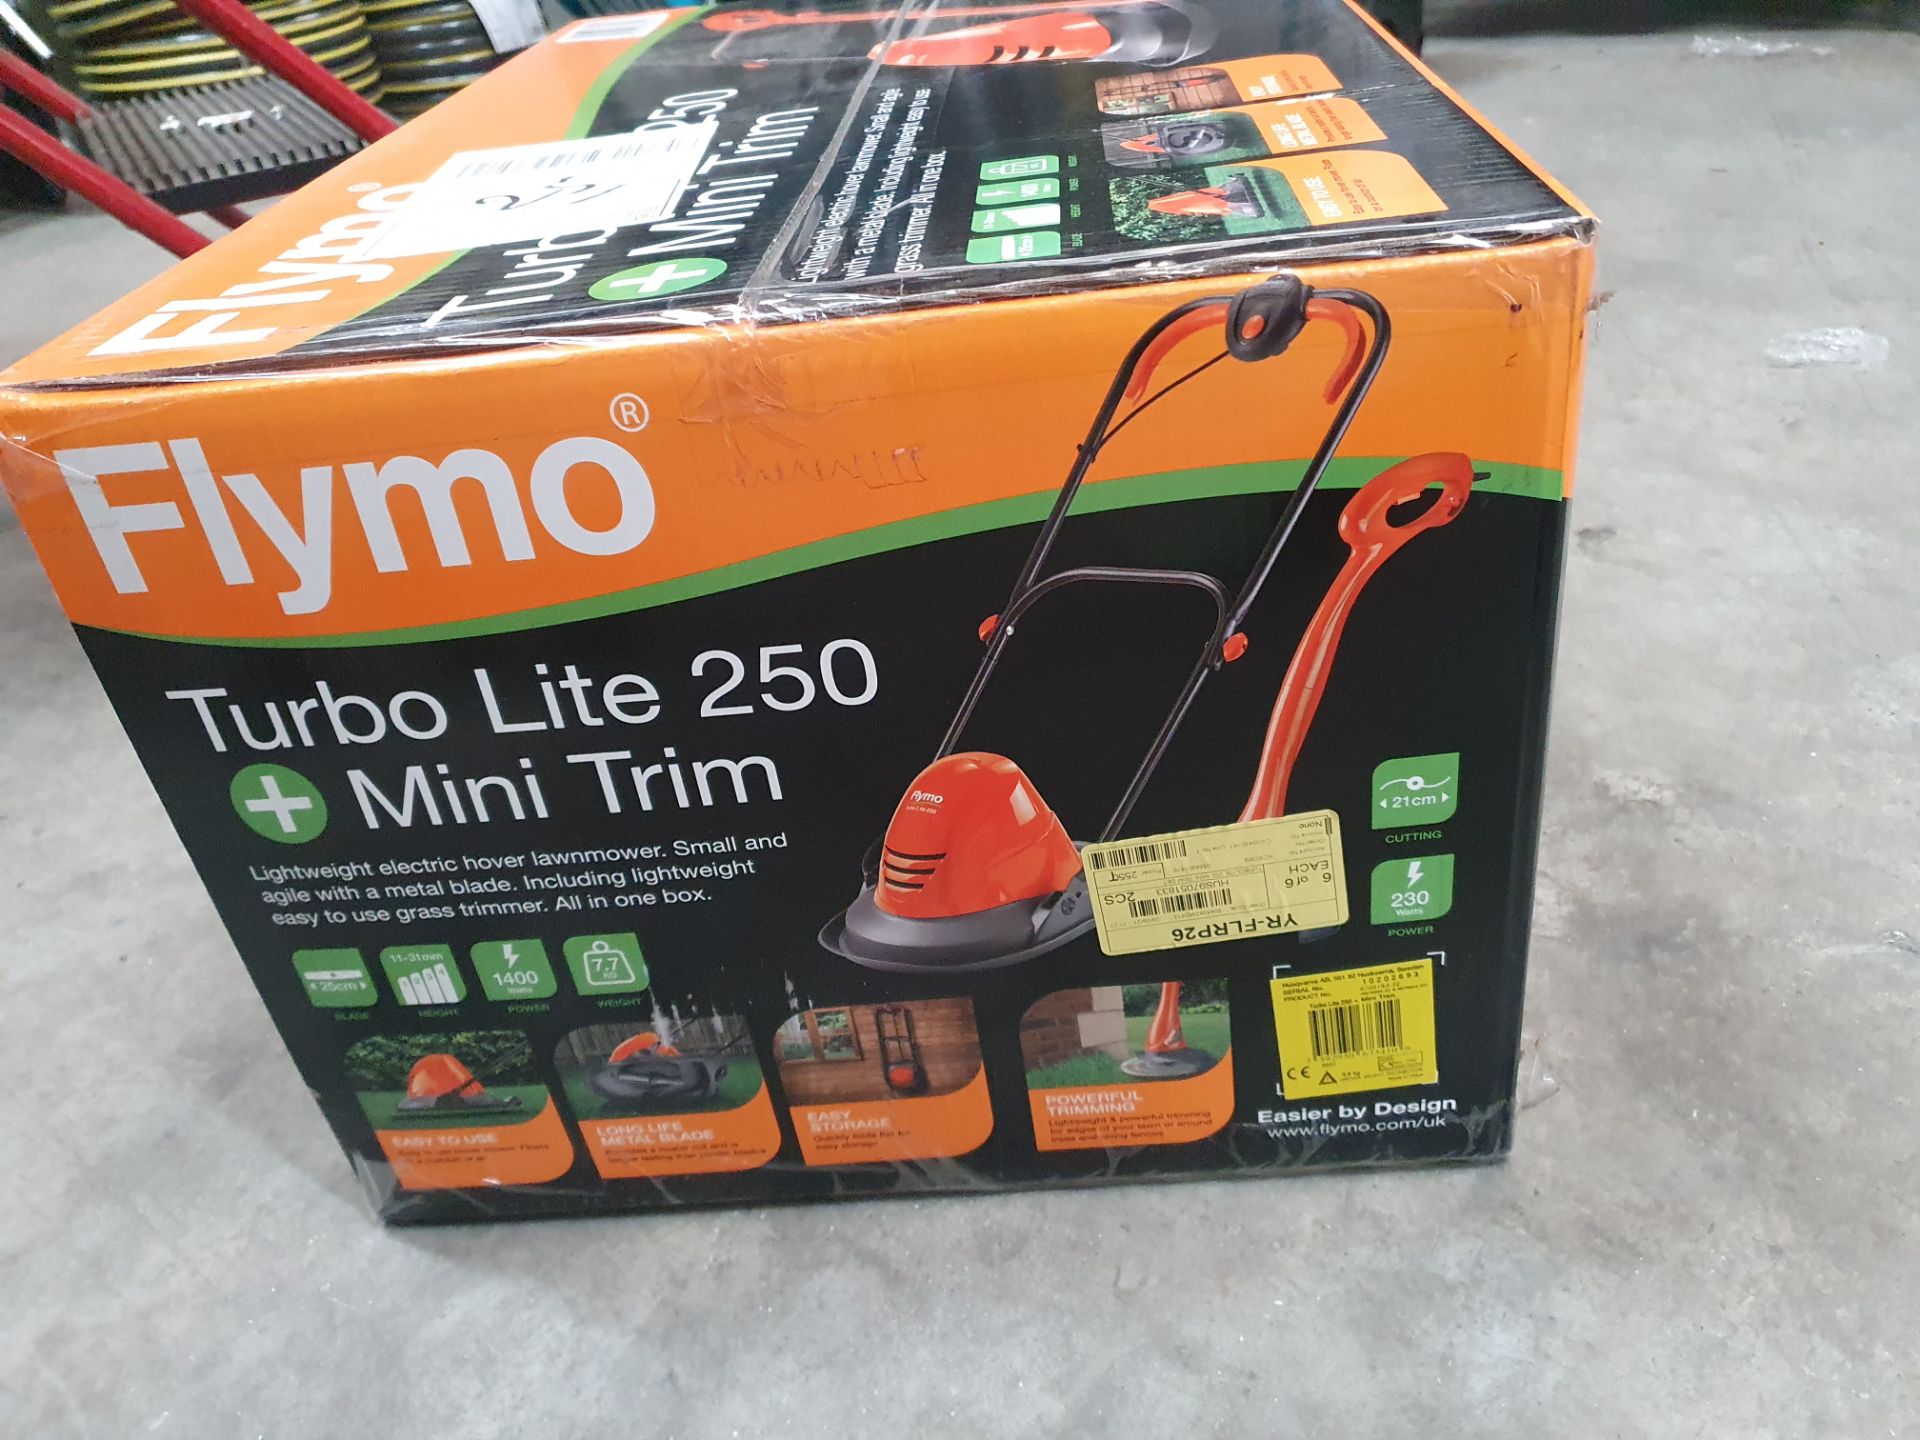 * Flymo Turbolite 250 lightweight electric hover mower and grass trimmer - Image 2 of 2